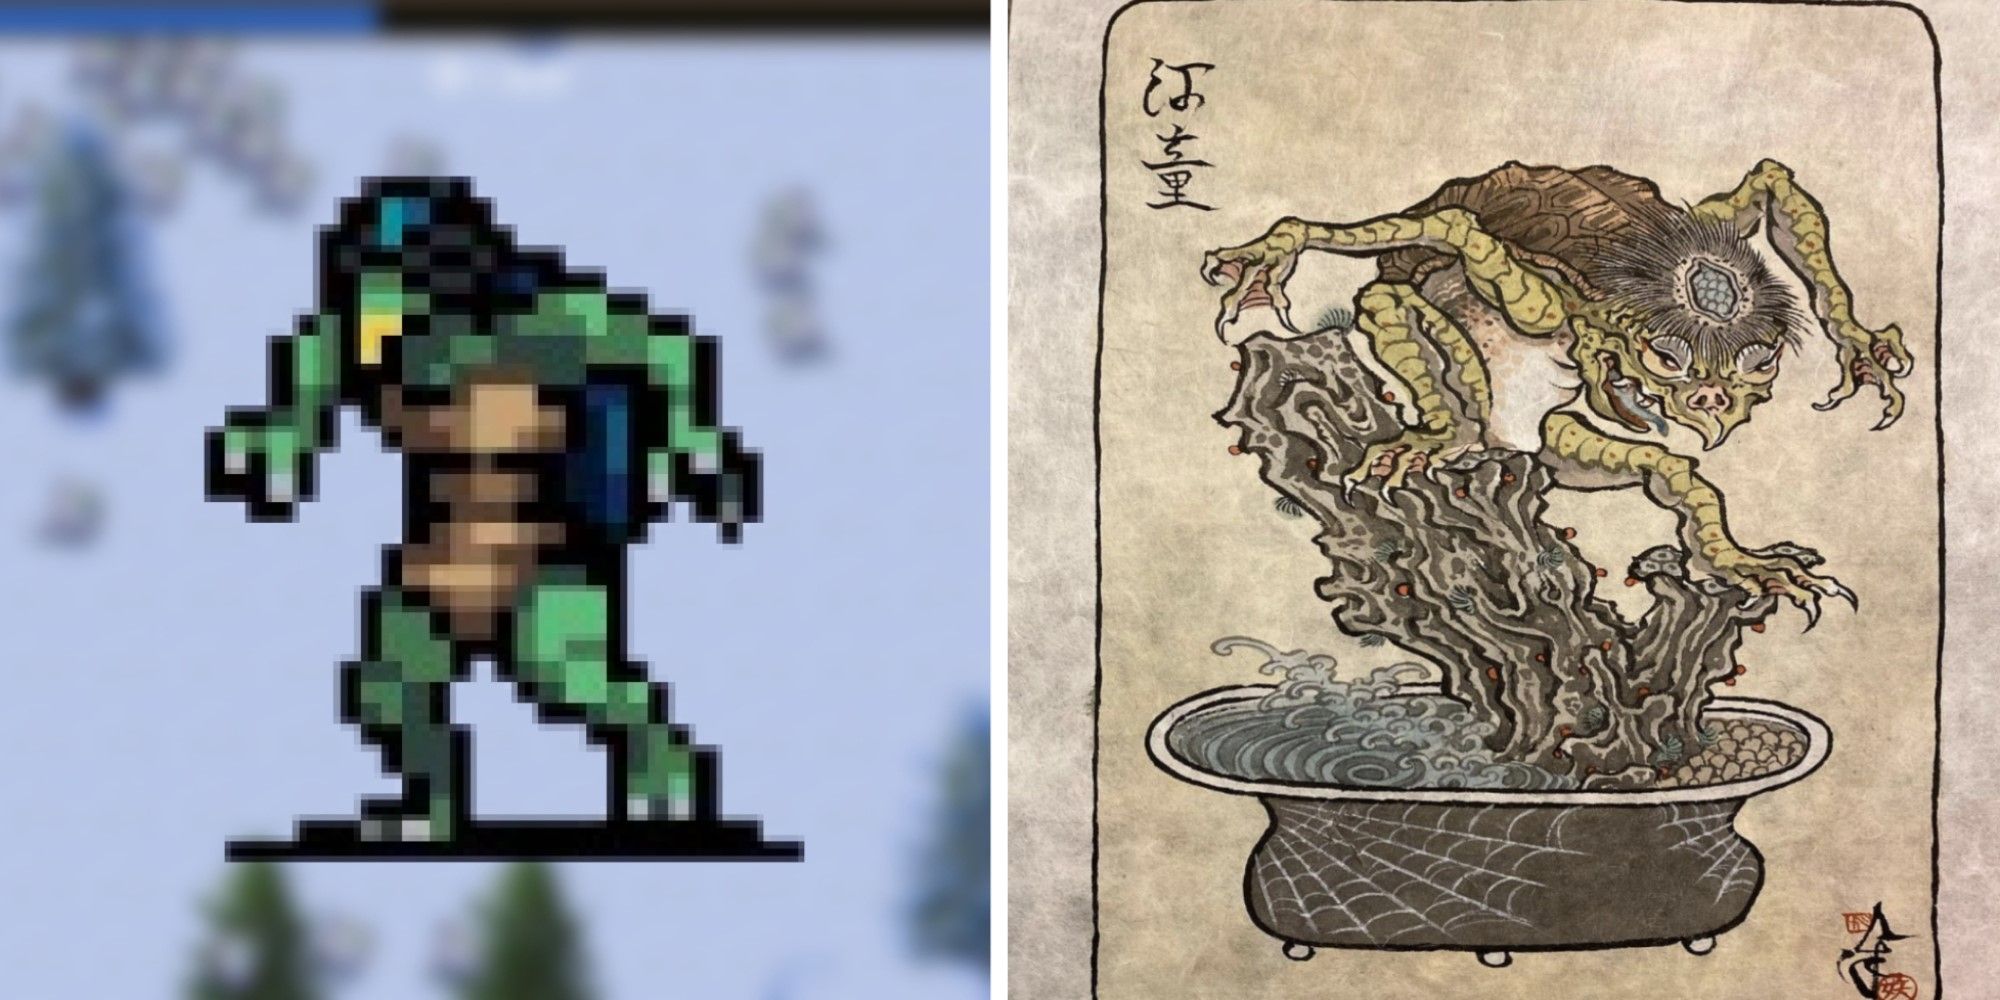 Sprite of the Kappa from Vampire Survivors alongside traditional art of a Kappa.